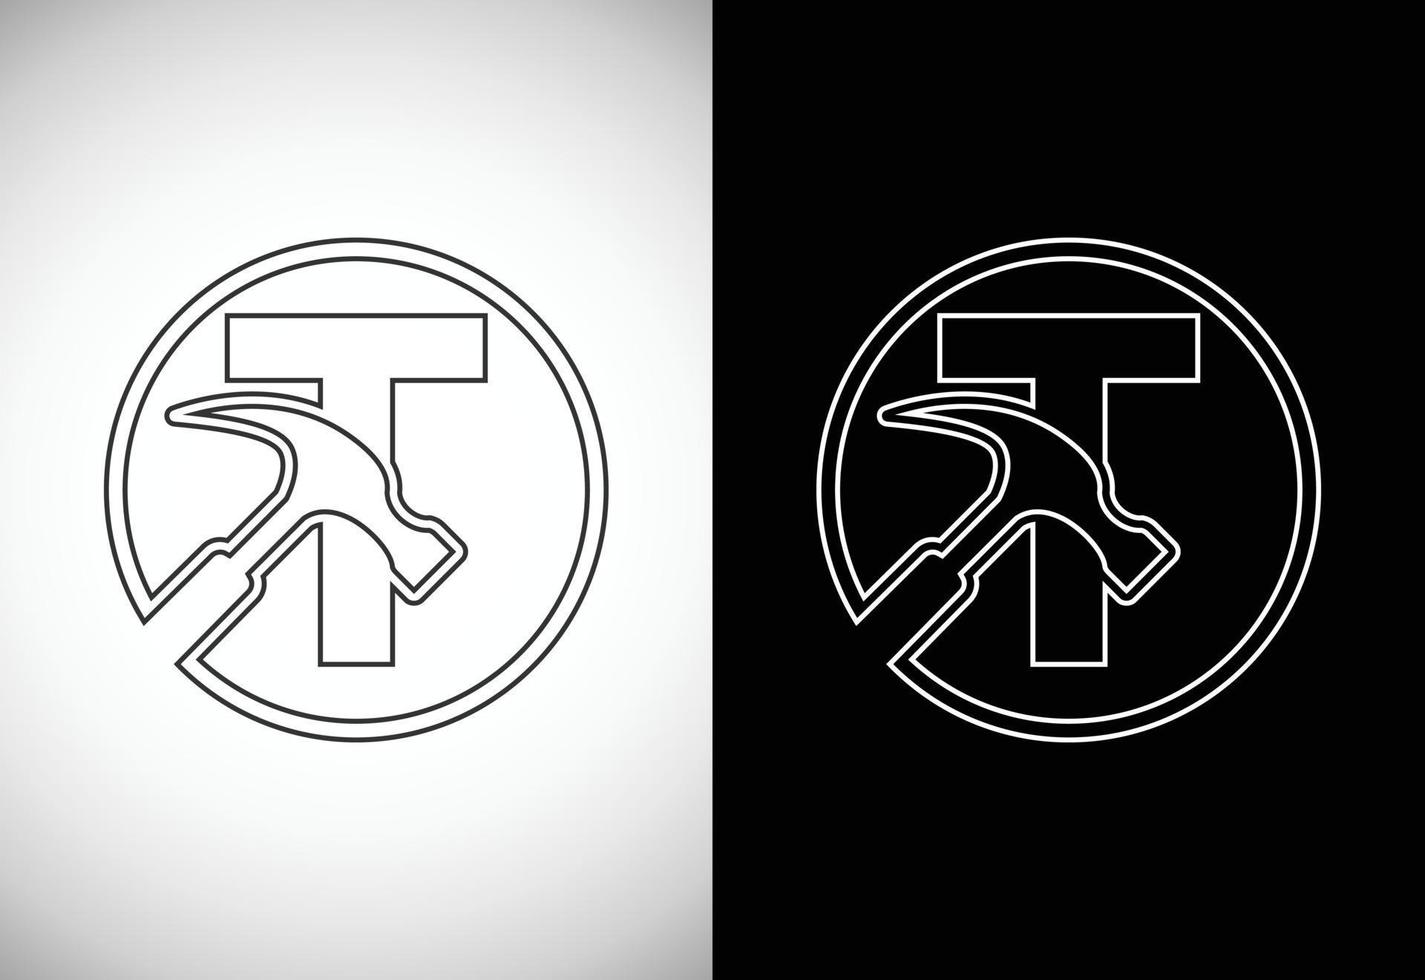 Initial T letter alphabet with a Hammer. Repair, renovation, and construction logo. Line art style logo vector